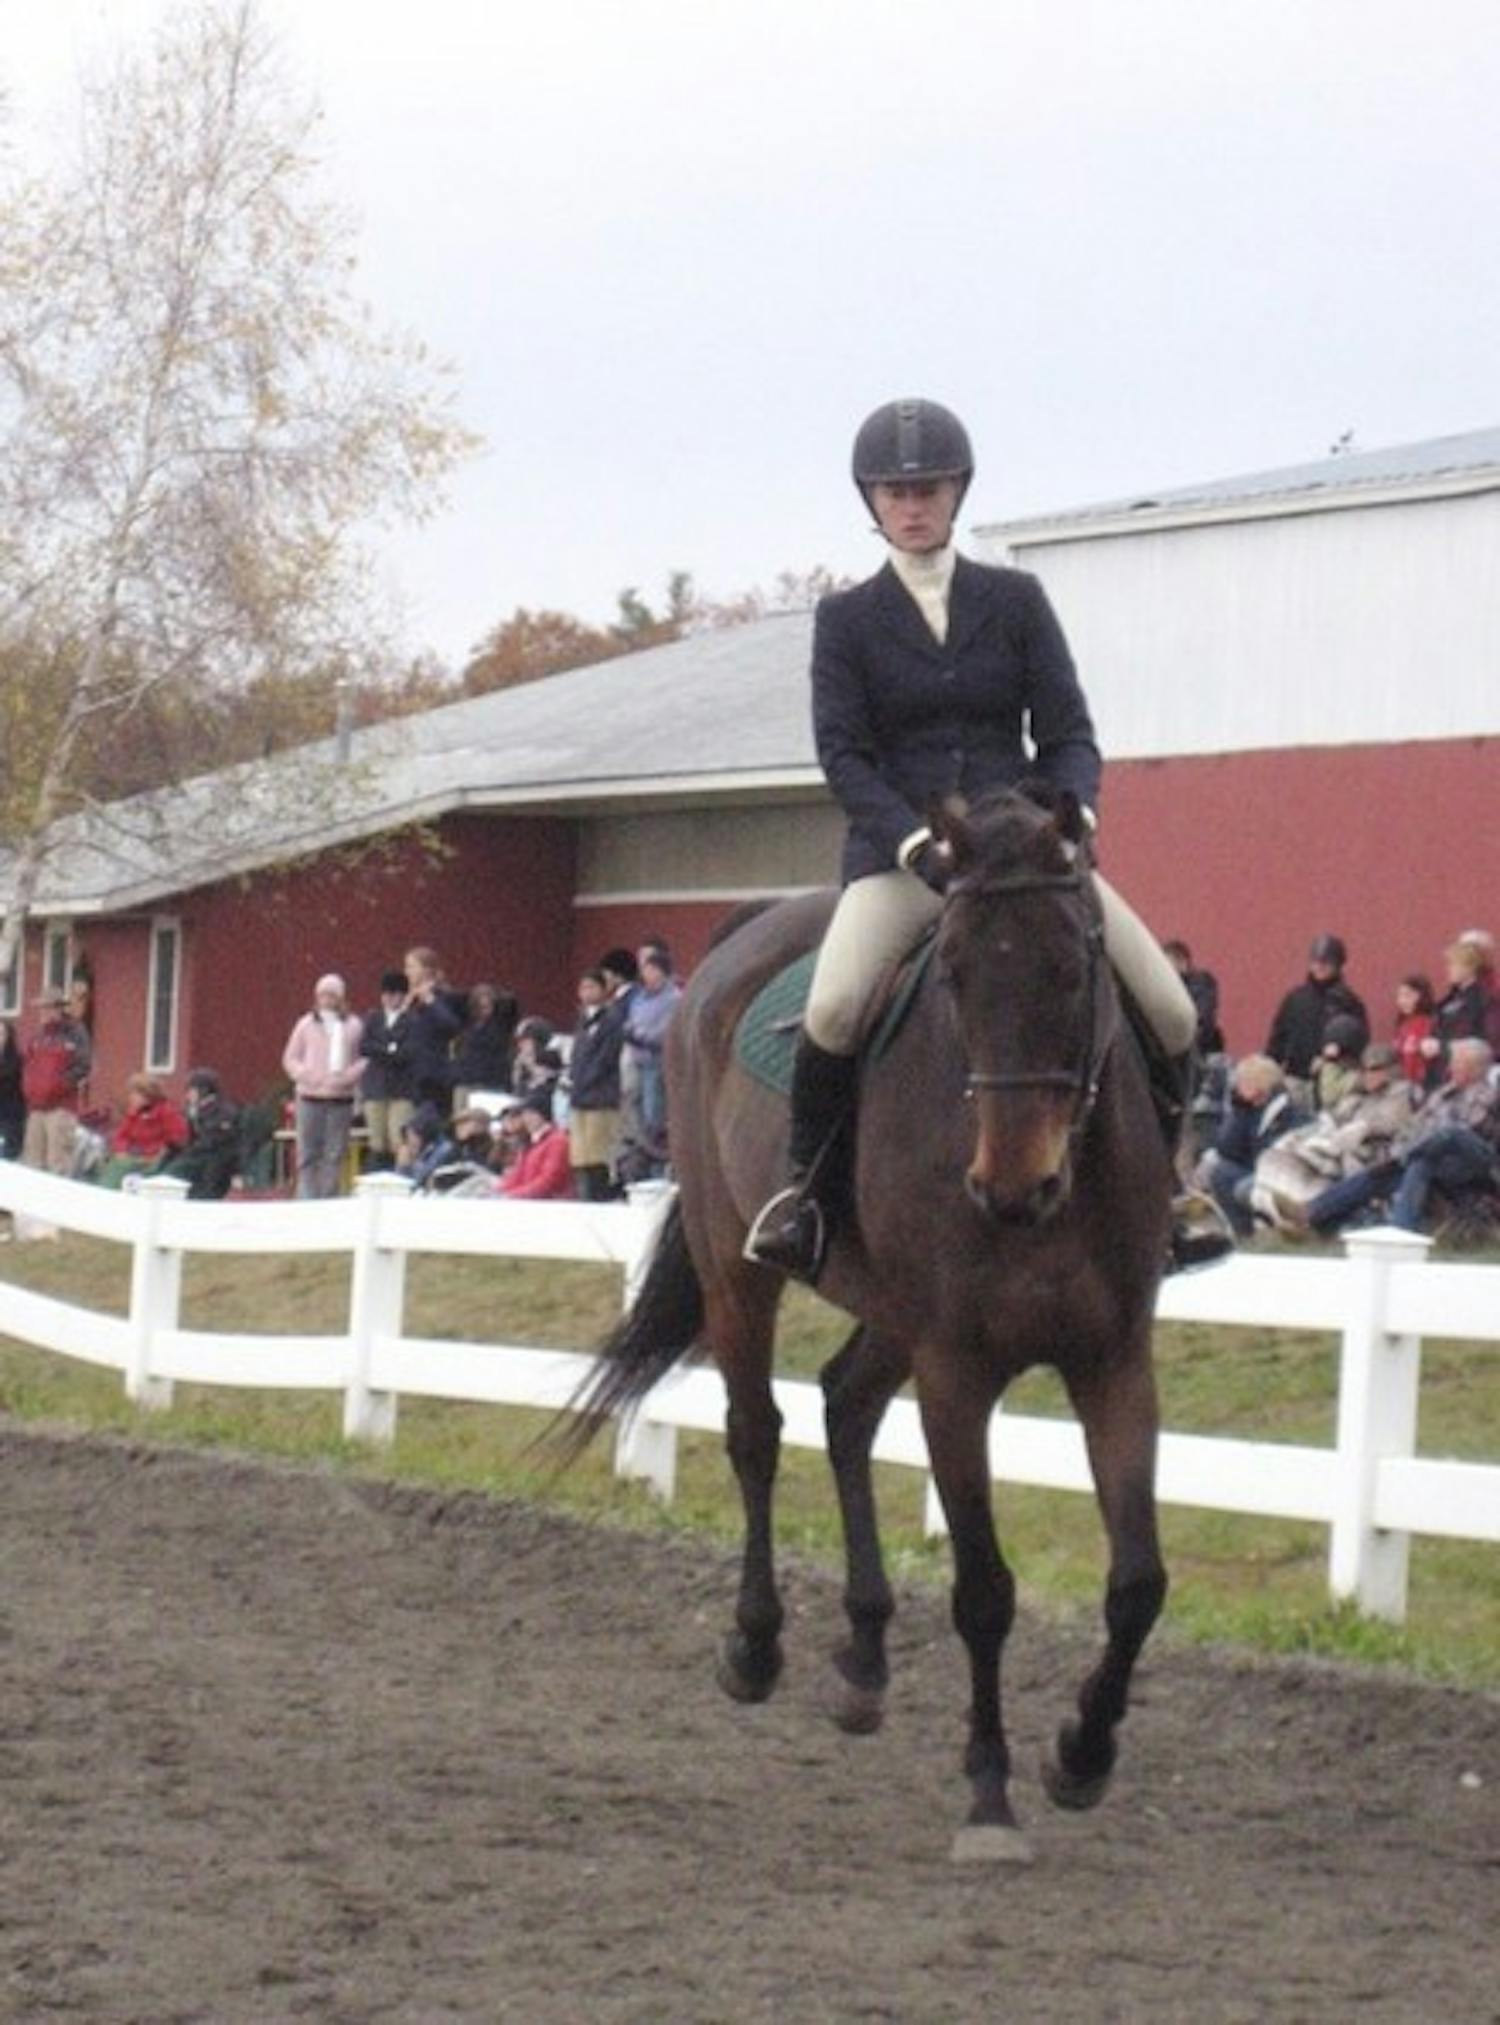 Daisy Freund '08 and the rest of the Dartmouth equestrian team topped the competition at the IHSA Zone 1, Region 2 championships.